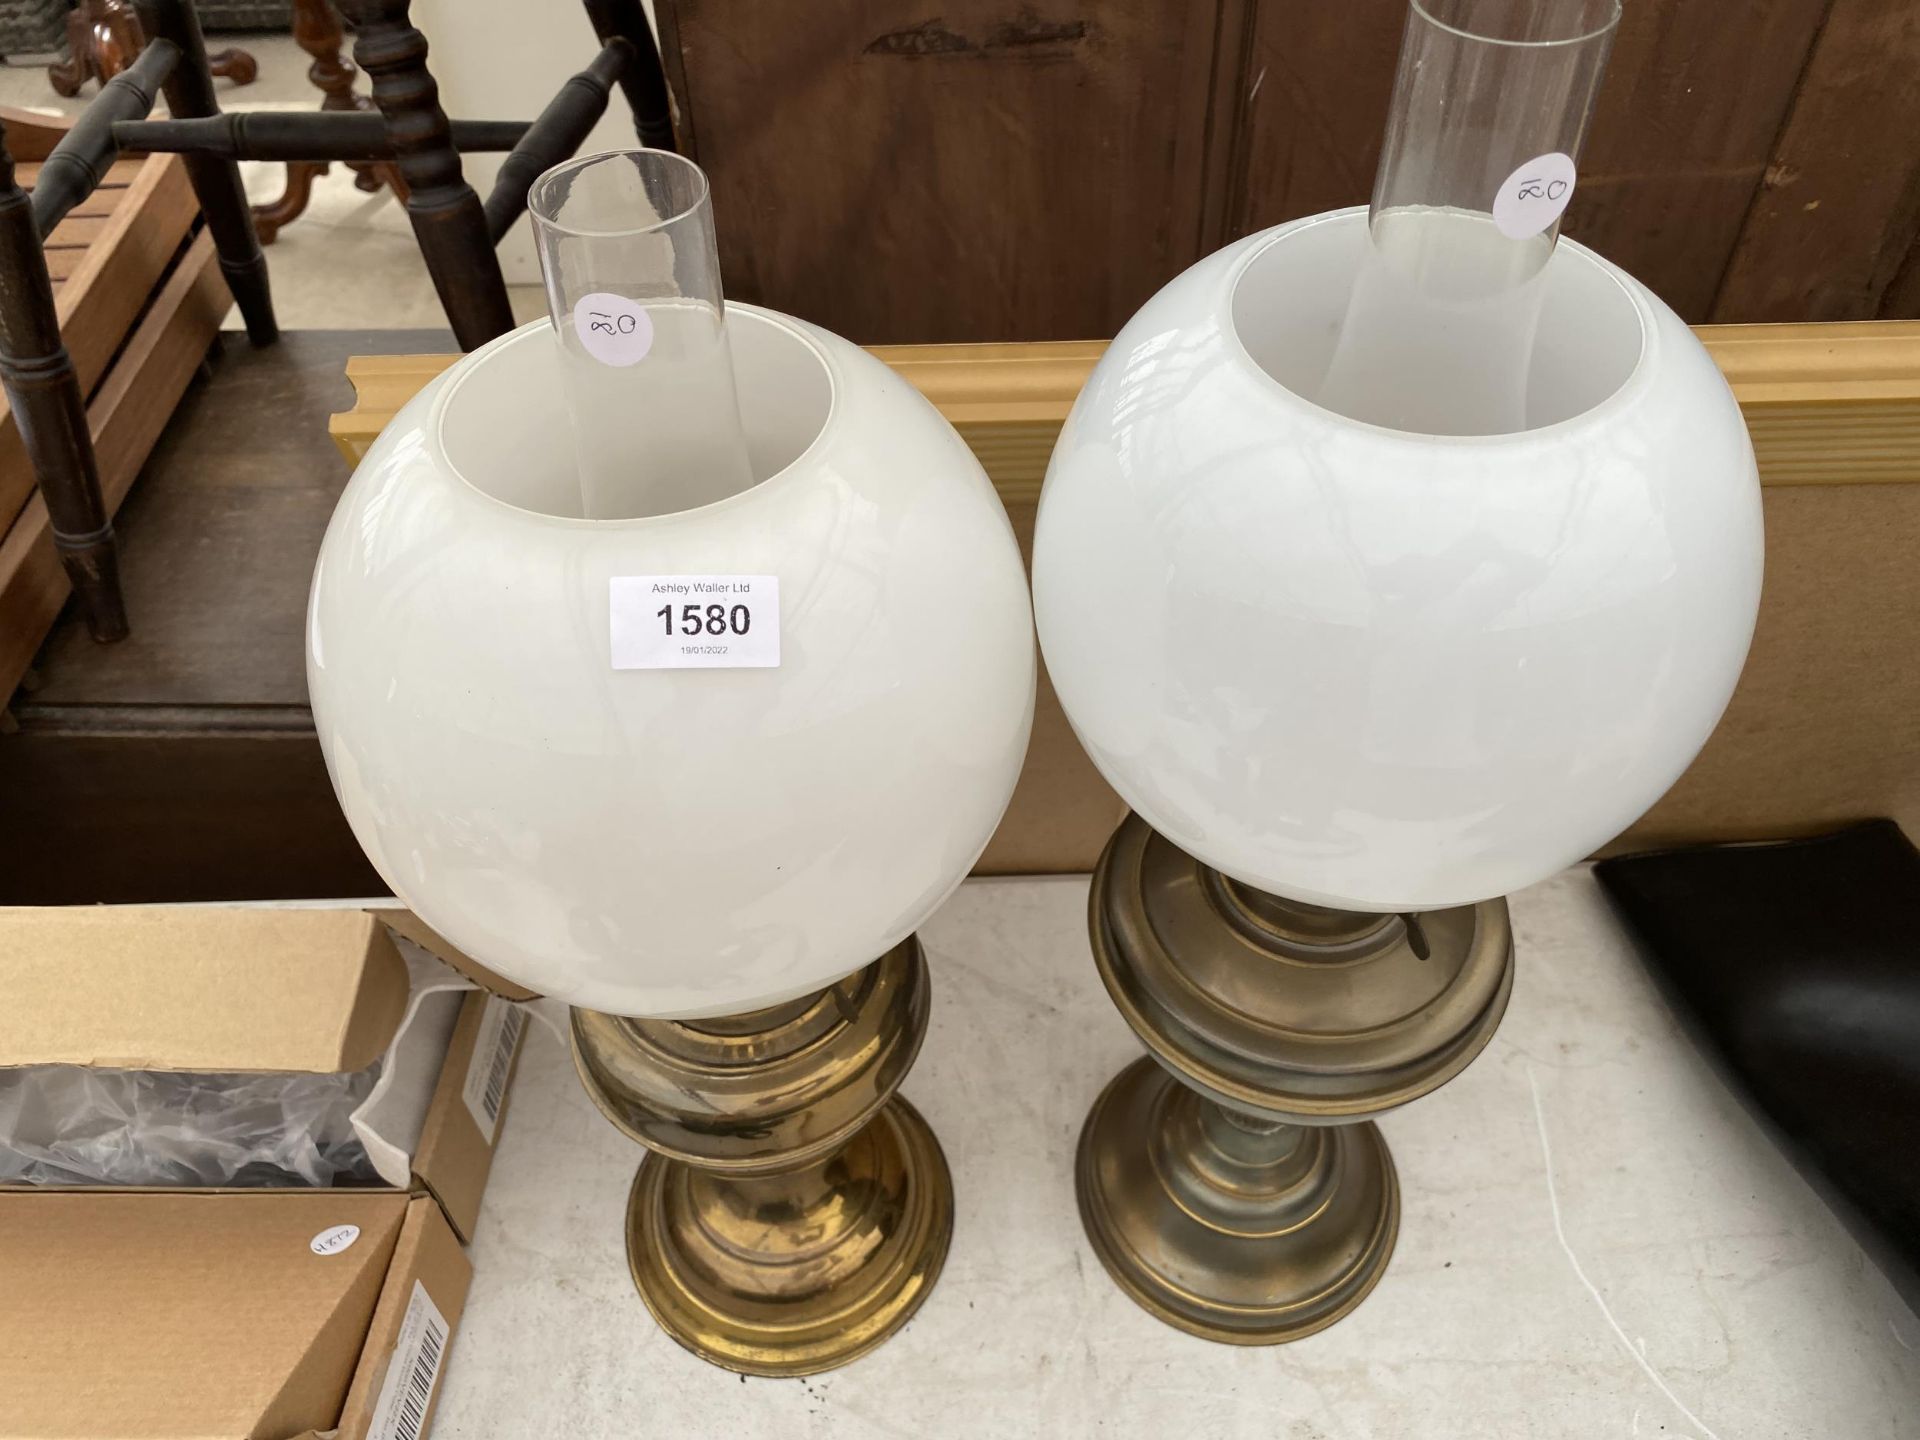 A NEAR PAIR OF BRASS OIL LAMPS WITH GLASS SHADES - Image 2 of 3